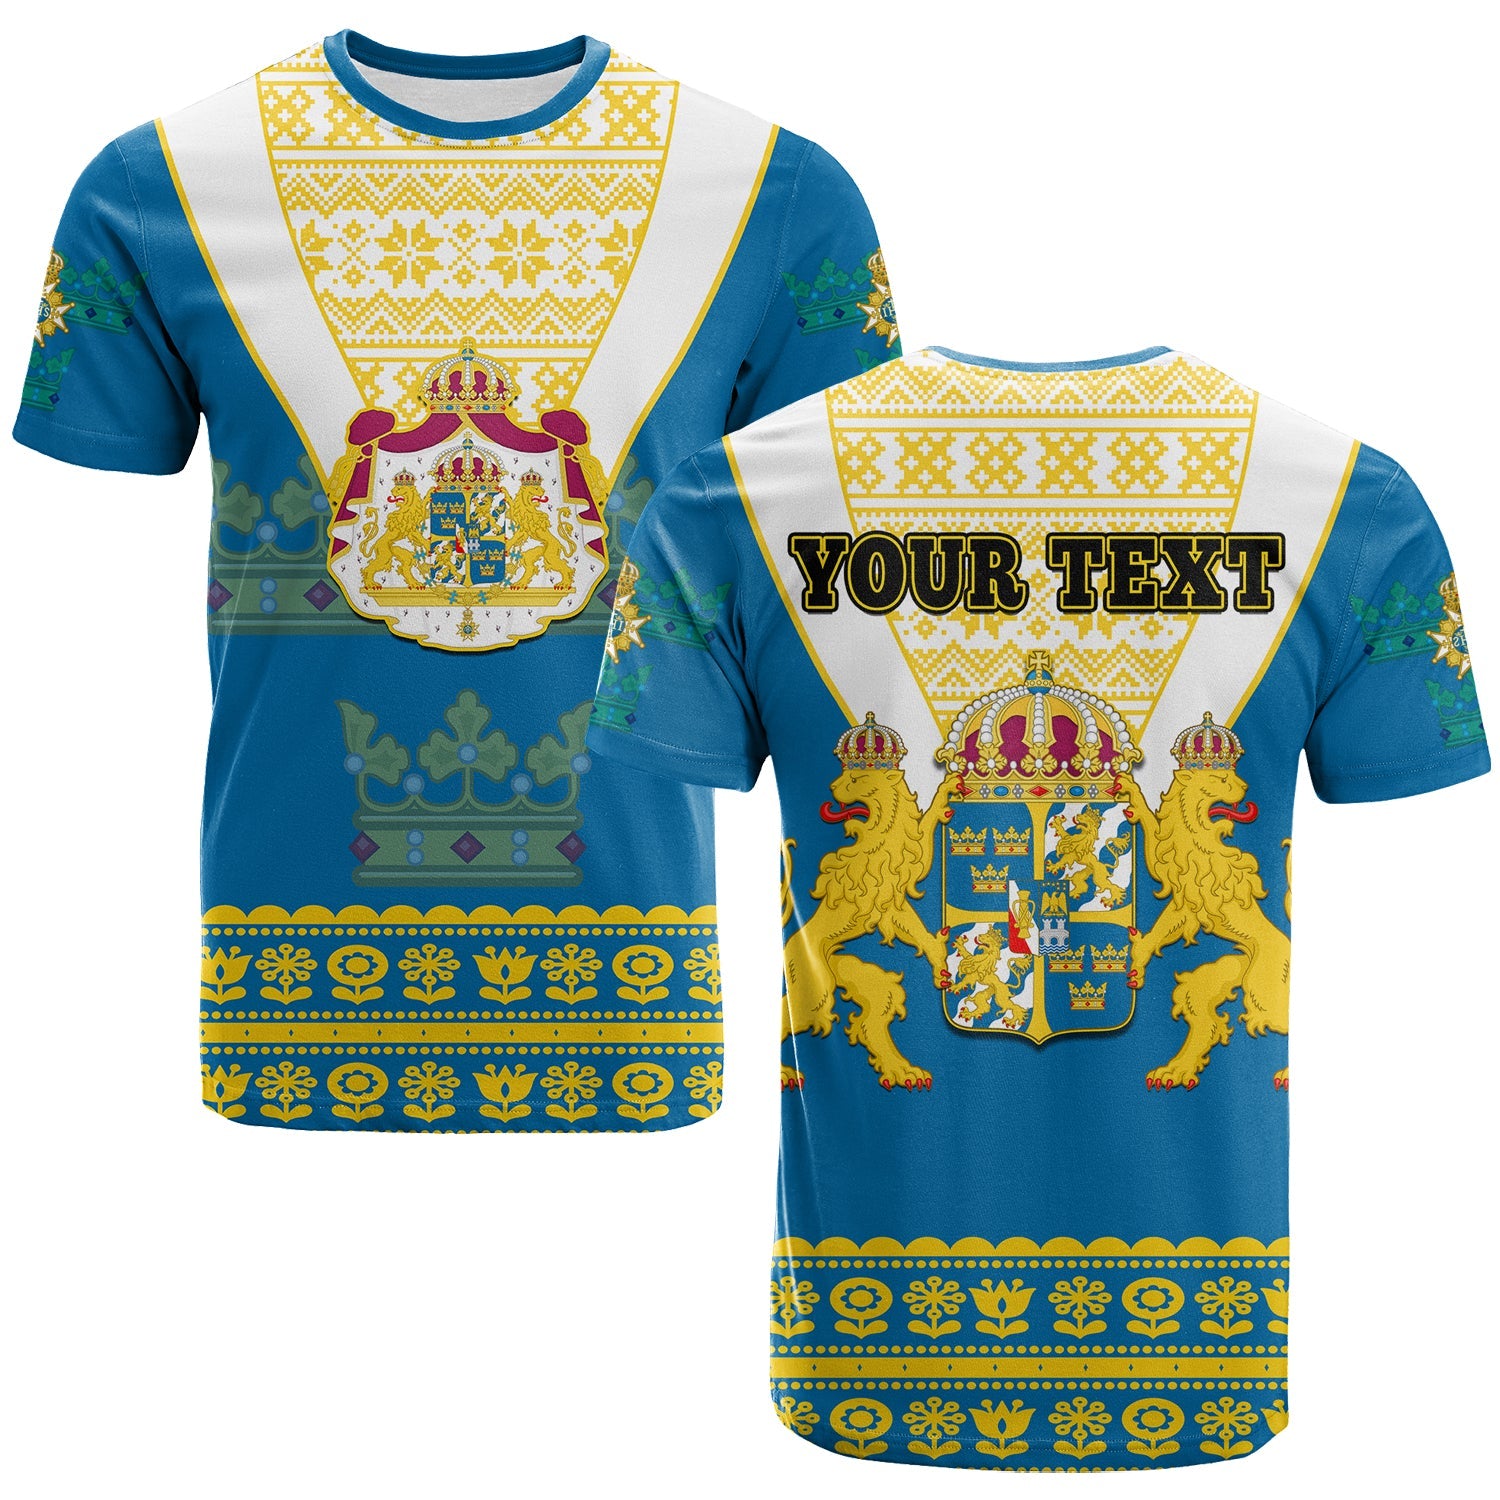 custom-personalised-sweden-t-shirt-swedish-coat-of-arms-with-scandinavian-flowers